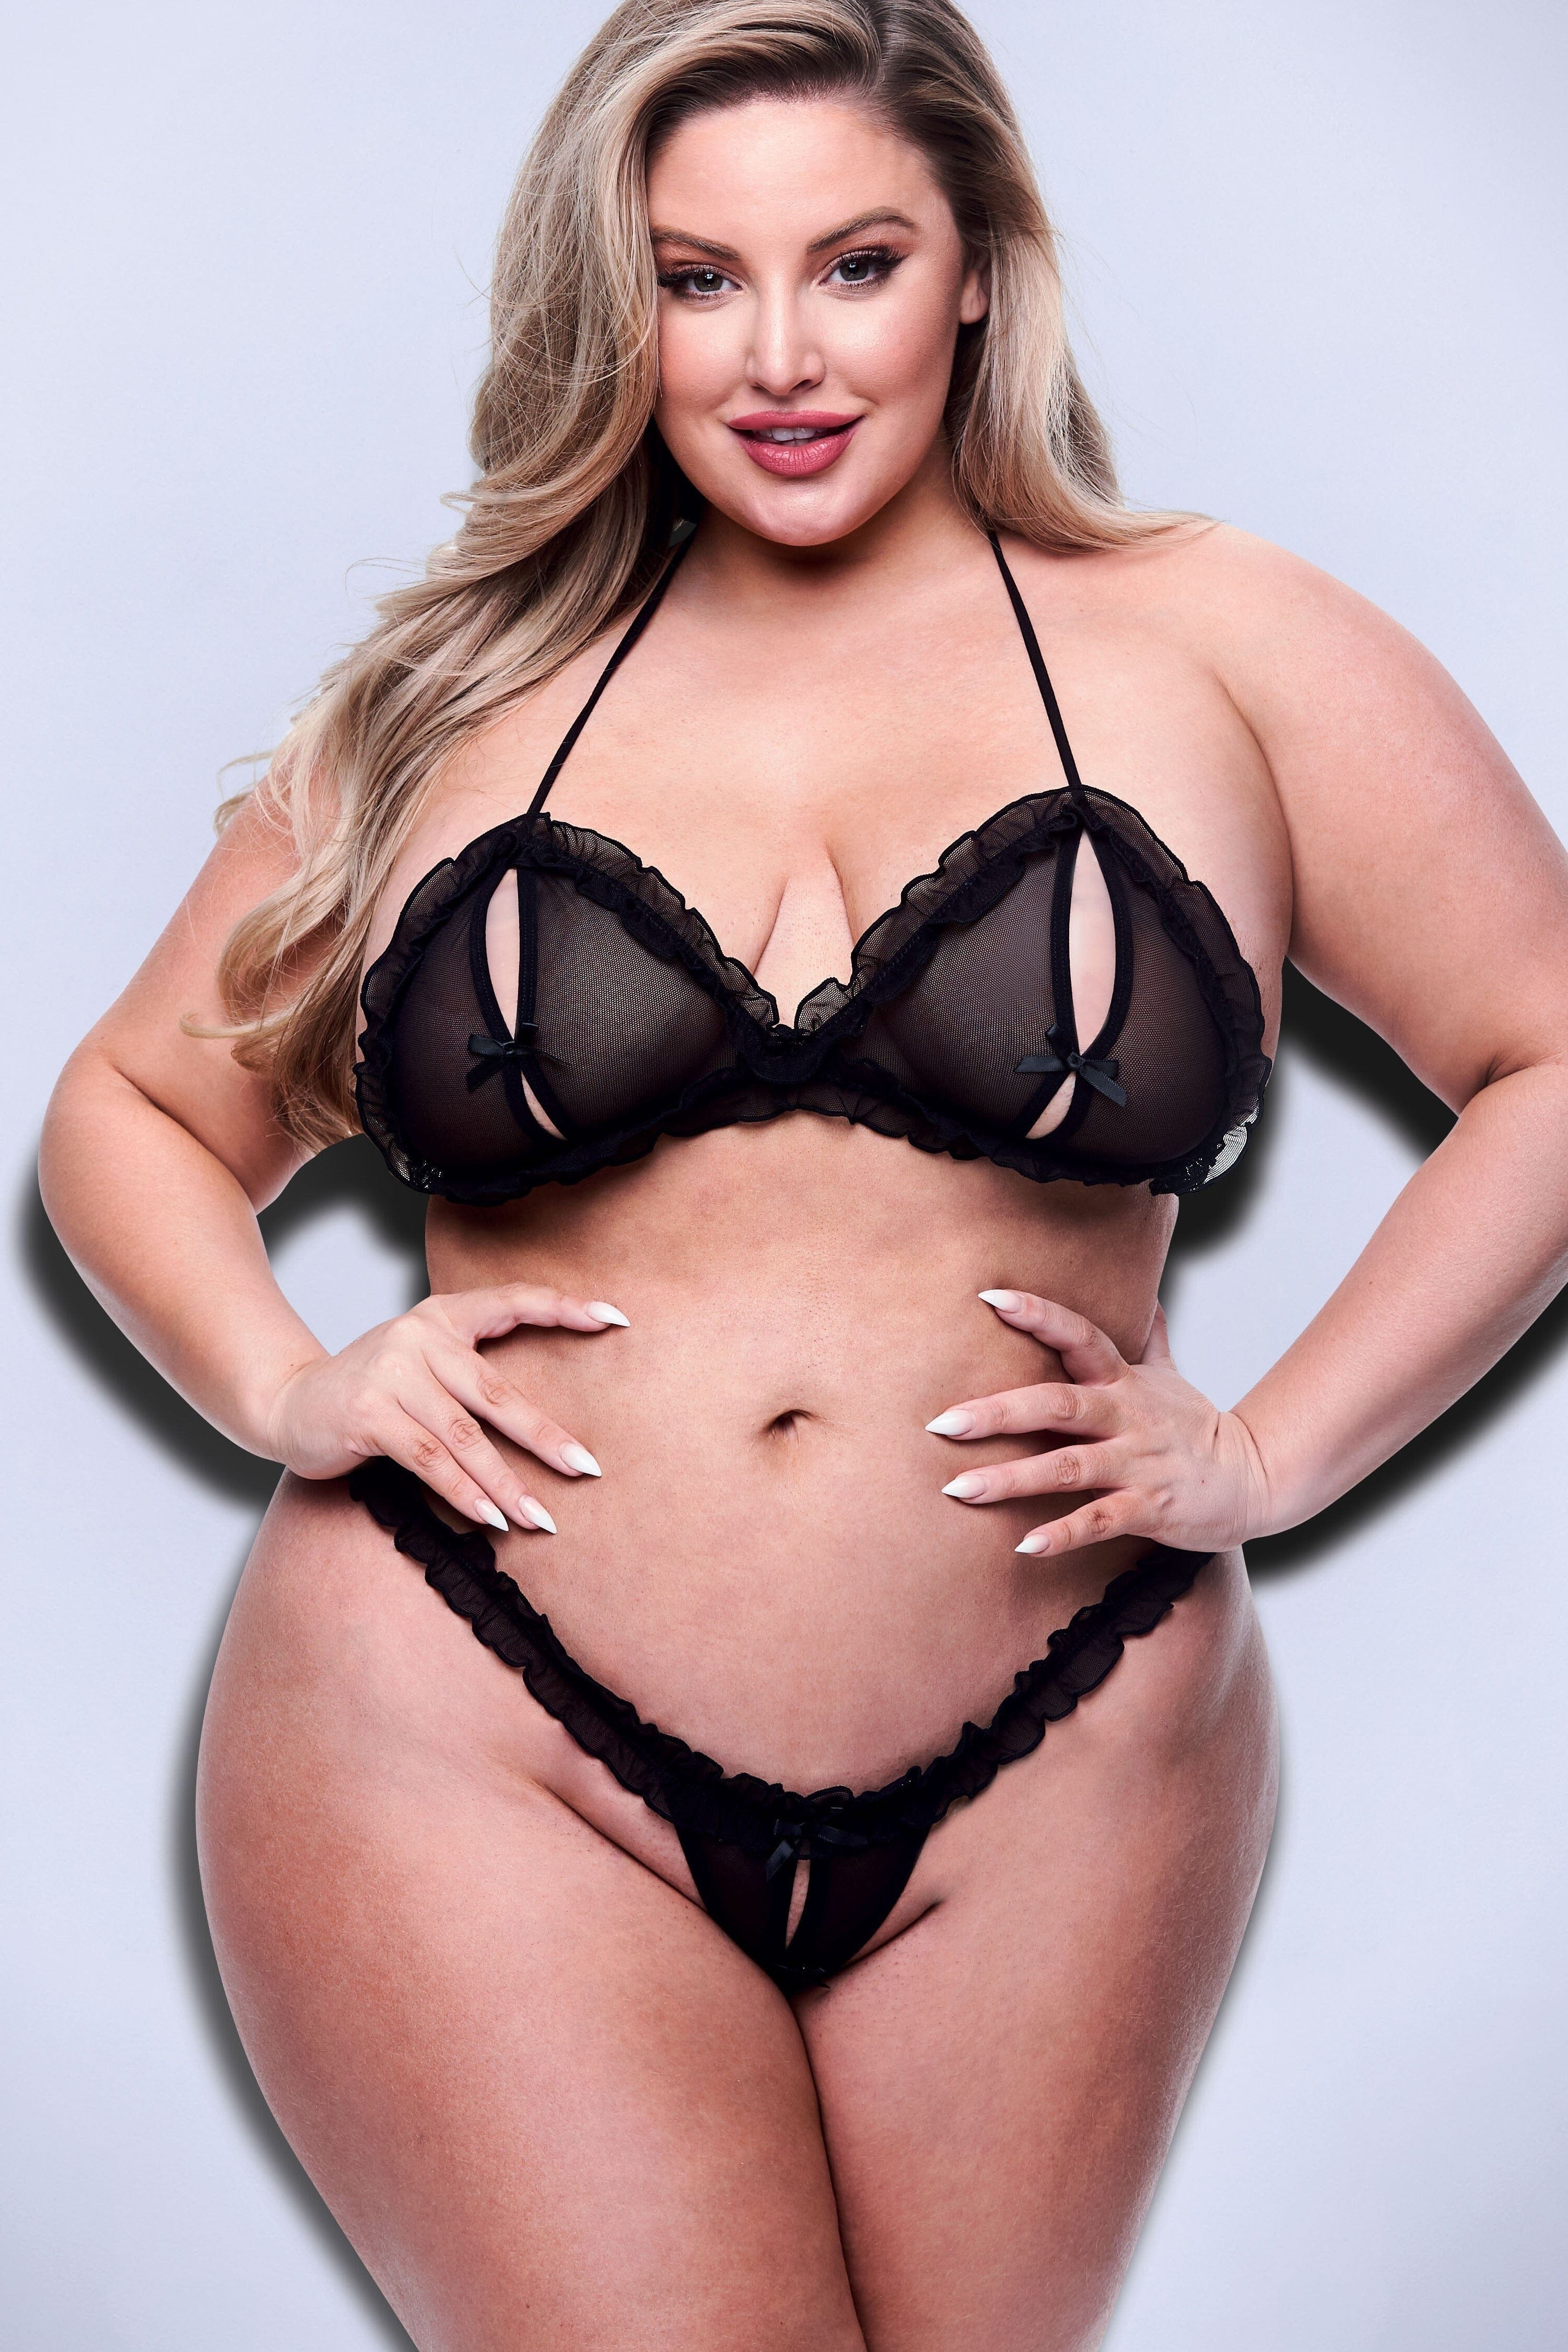 Baci Lingerie 2Pc Peek-A-Boo Bra and Crotchless G-String Set Plus Size Lingerie Sets Now Available at SexyShoes